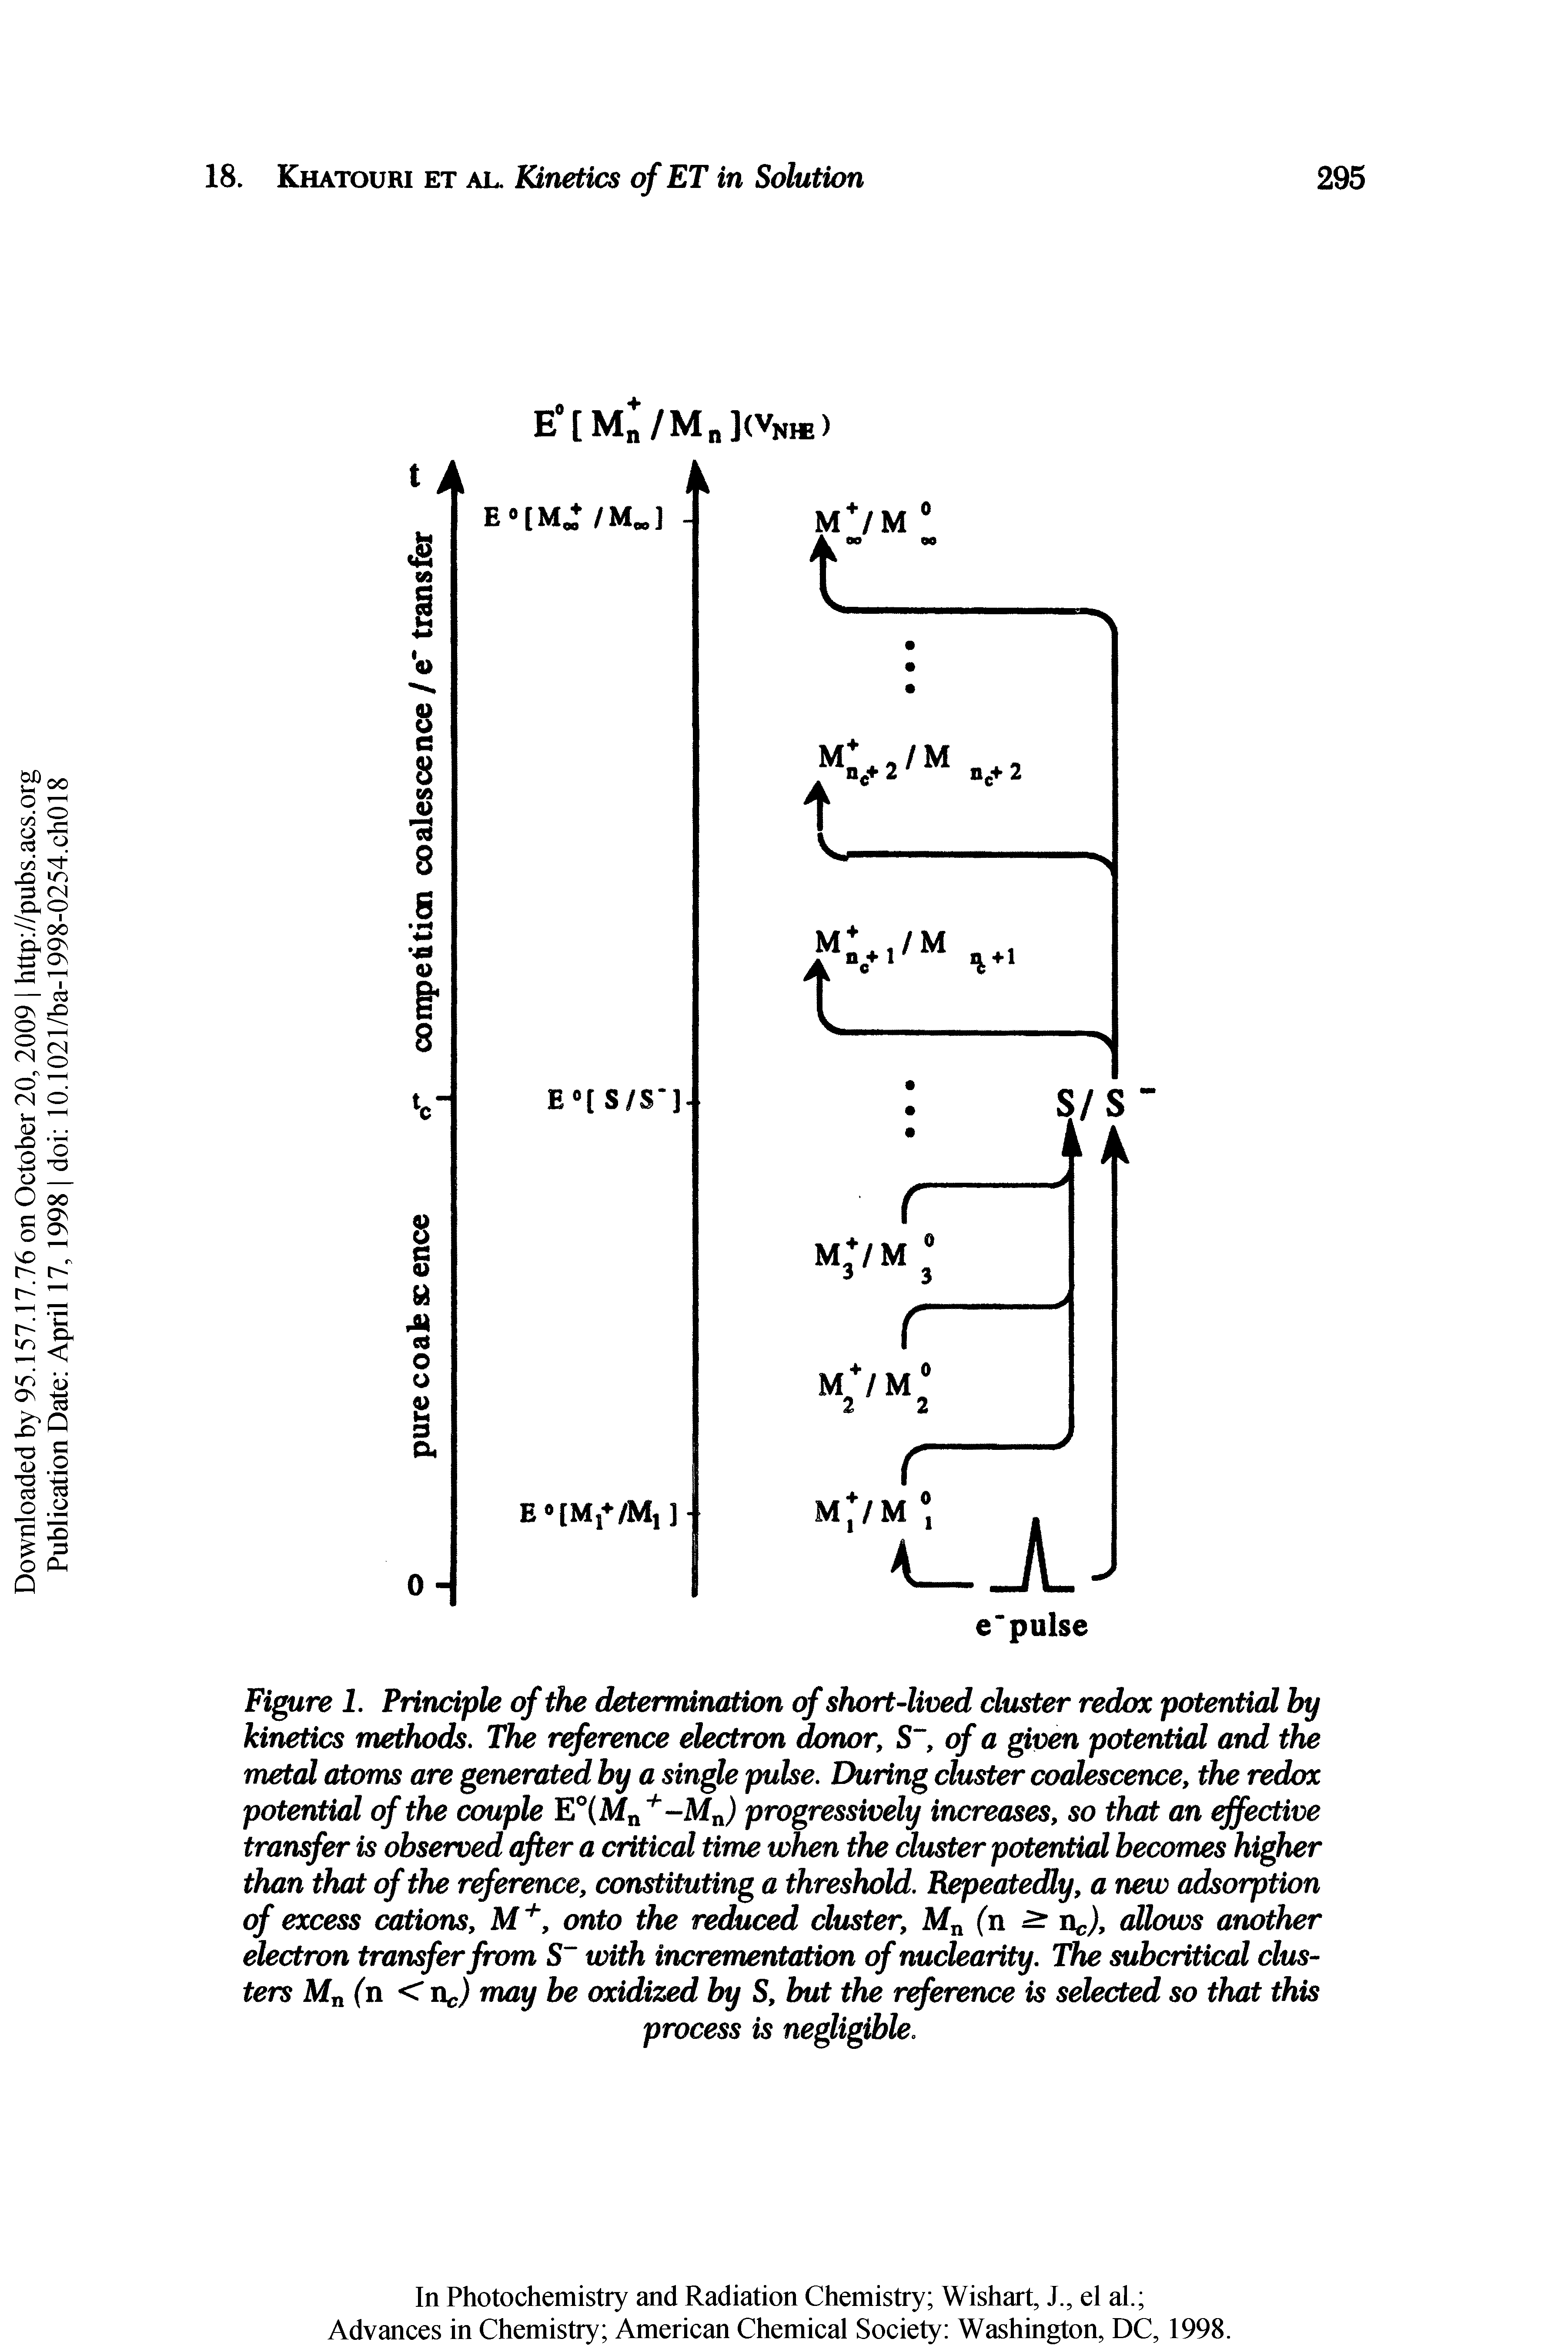 Figure 1. Principle of the determination of short-lived cluster redox potential by kinetics methods. The reference electron donor, S of a given potential and the metal atoms are generated by a single puke. During cluster coalescence, the redox potential of the couple E°(M -Mn) progressively increases, so that an effective transfer is observed after a critical time when the cluster potential becomes higher than that of the reference, constituting a threshold. Repeatedly, a new adsorption of excess cations, M, onto the reduced cluster, (n xkch (dlows another electron transfer from S with incrementation of nuclearity. The subcritical clusters Mn(n <Uc) may be oxidized by S, but the reference is selected so that this...